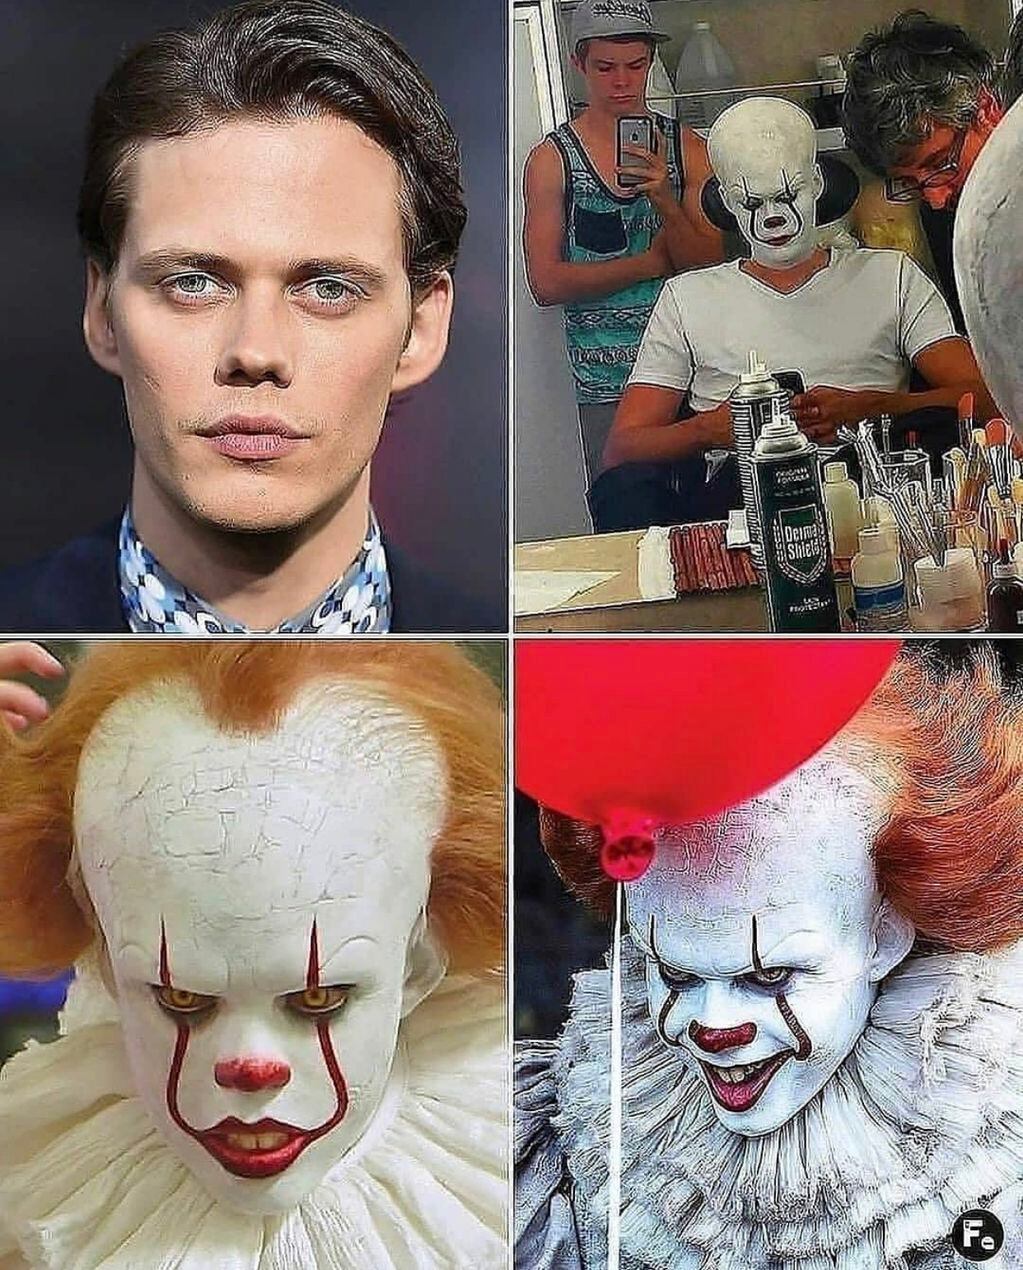 Bill como Pennywise.